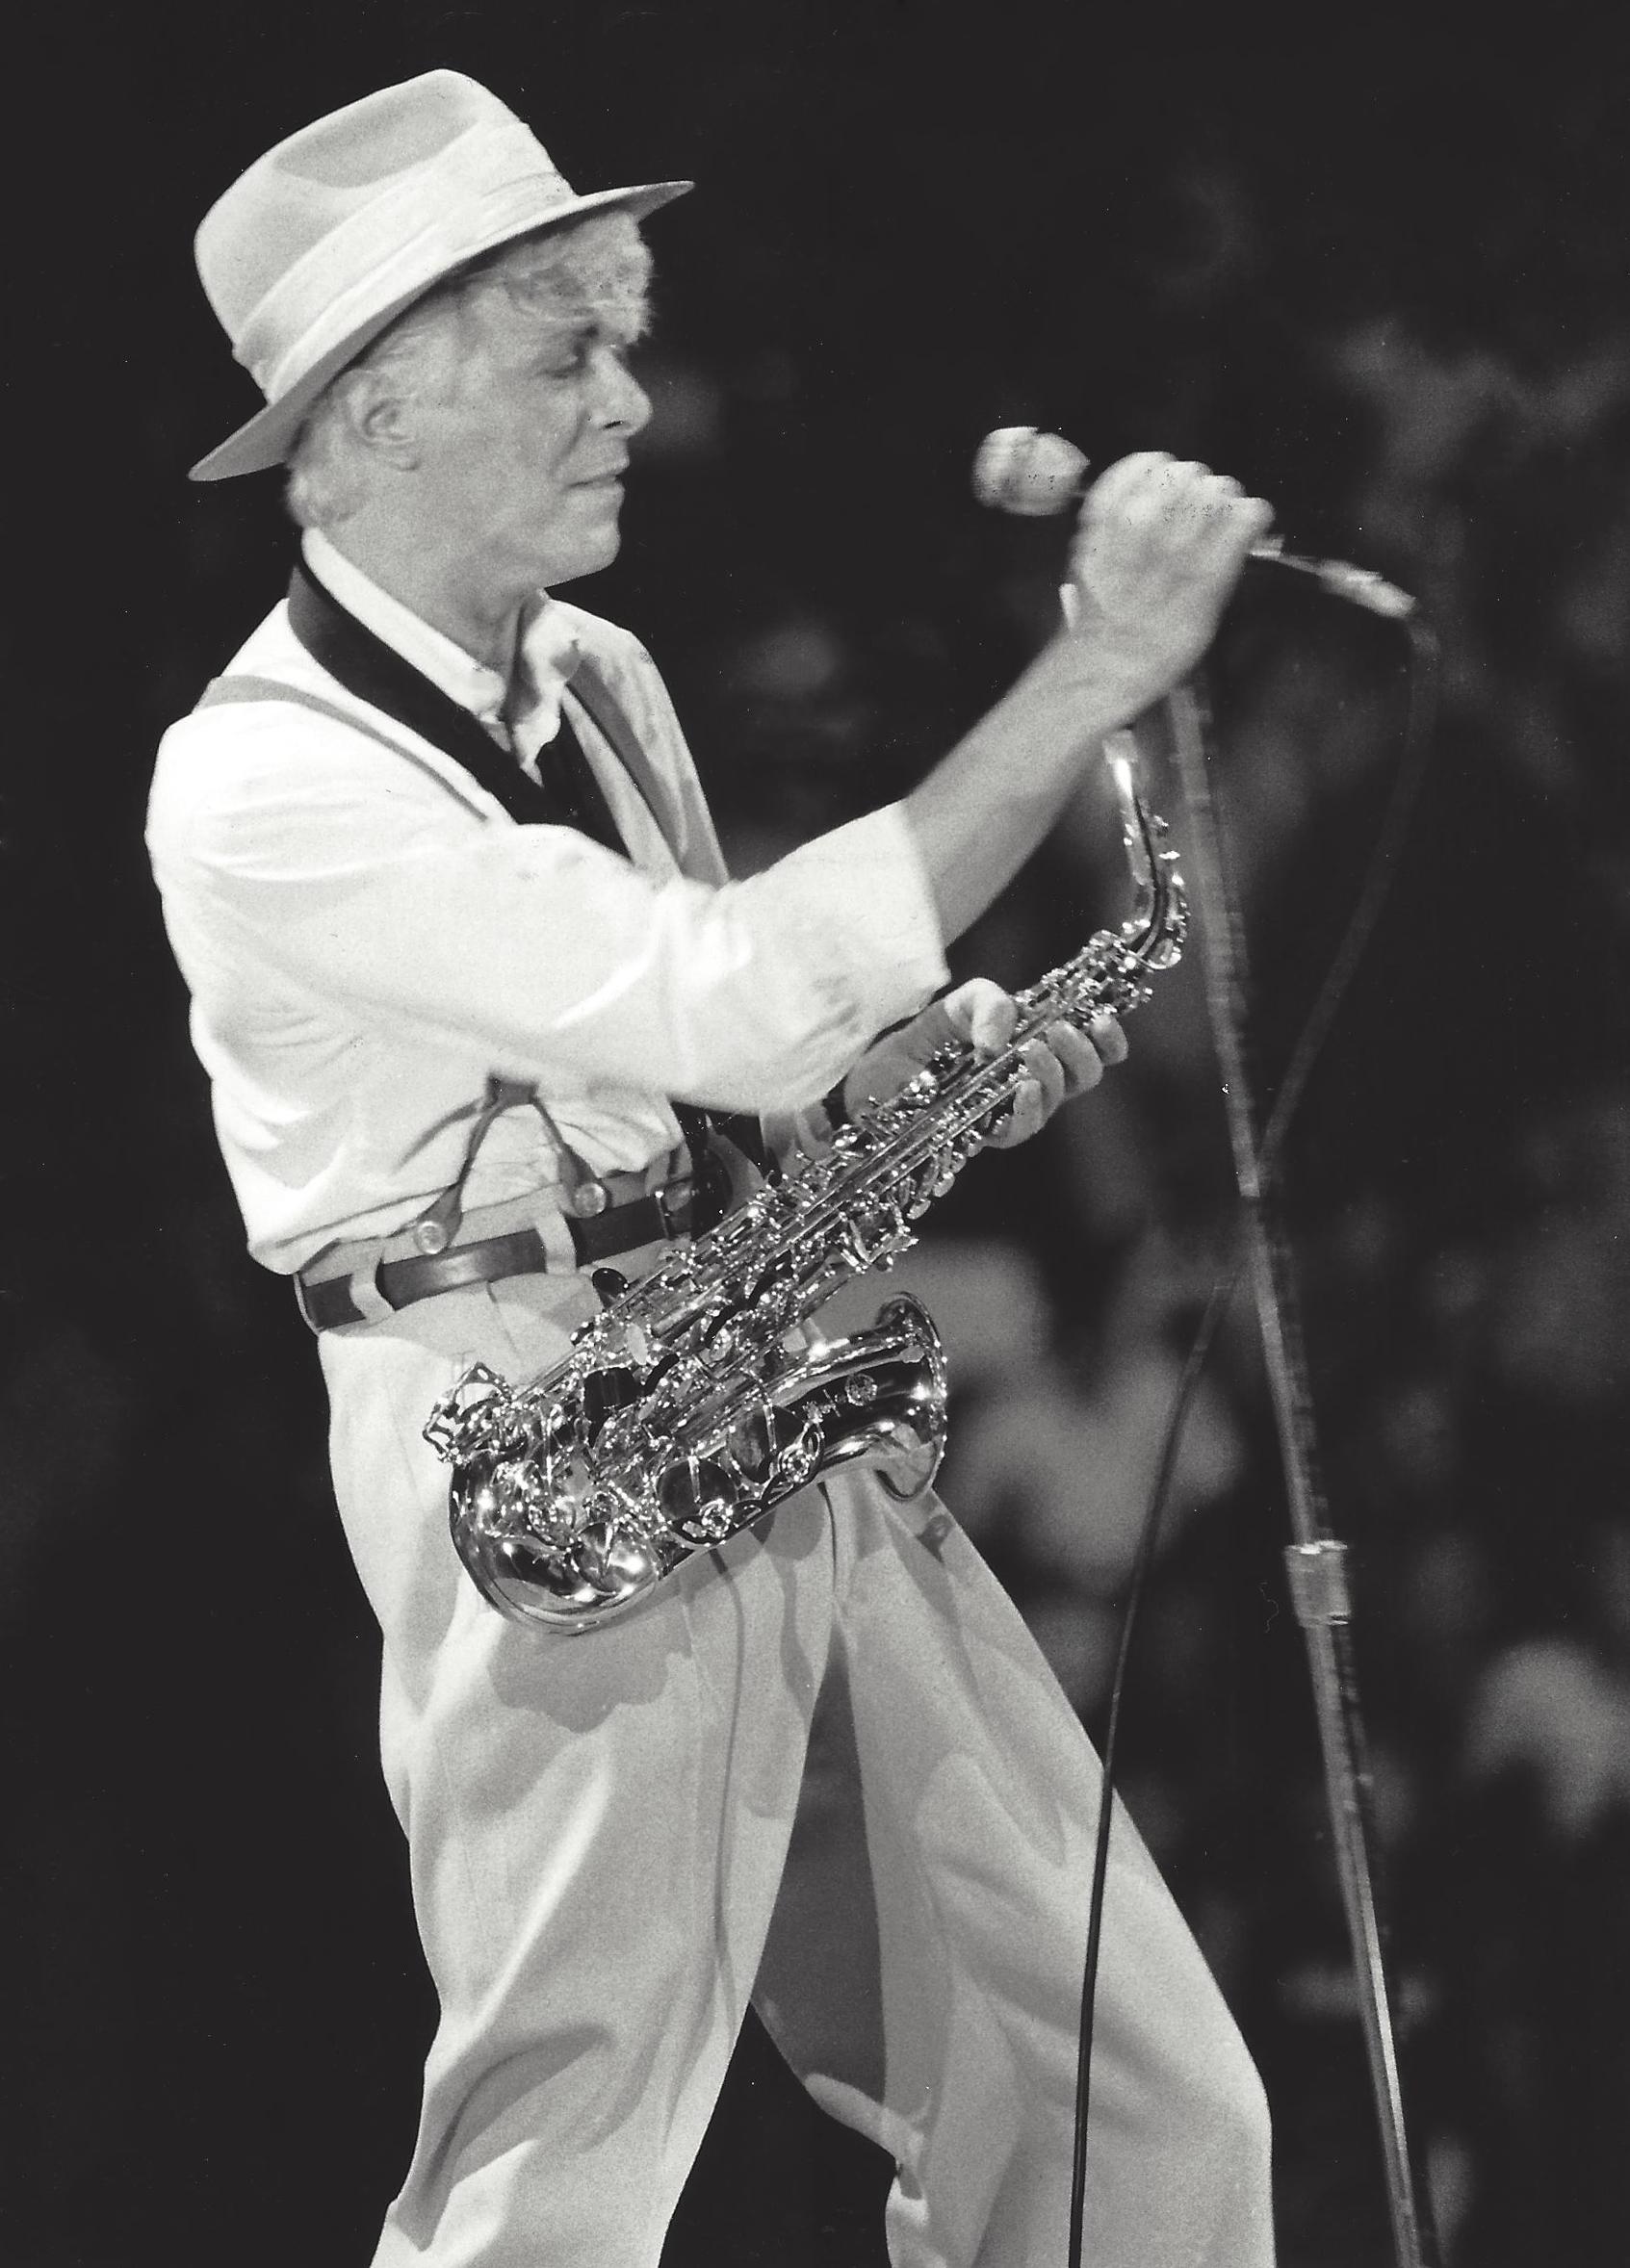 Paul Cox Black and White Photograph - David Bowie Performing with Saxaphone Vintage Original Photograph